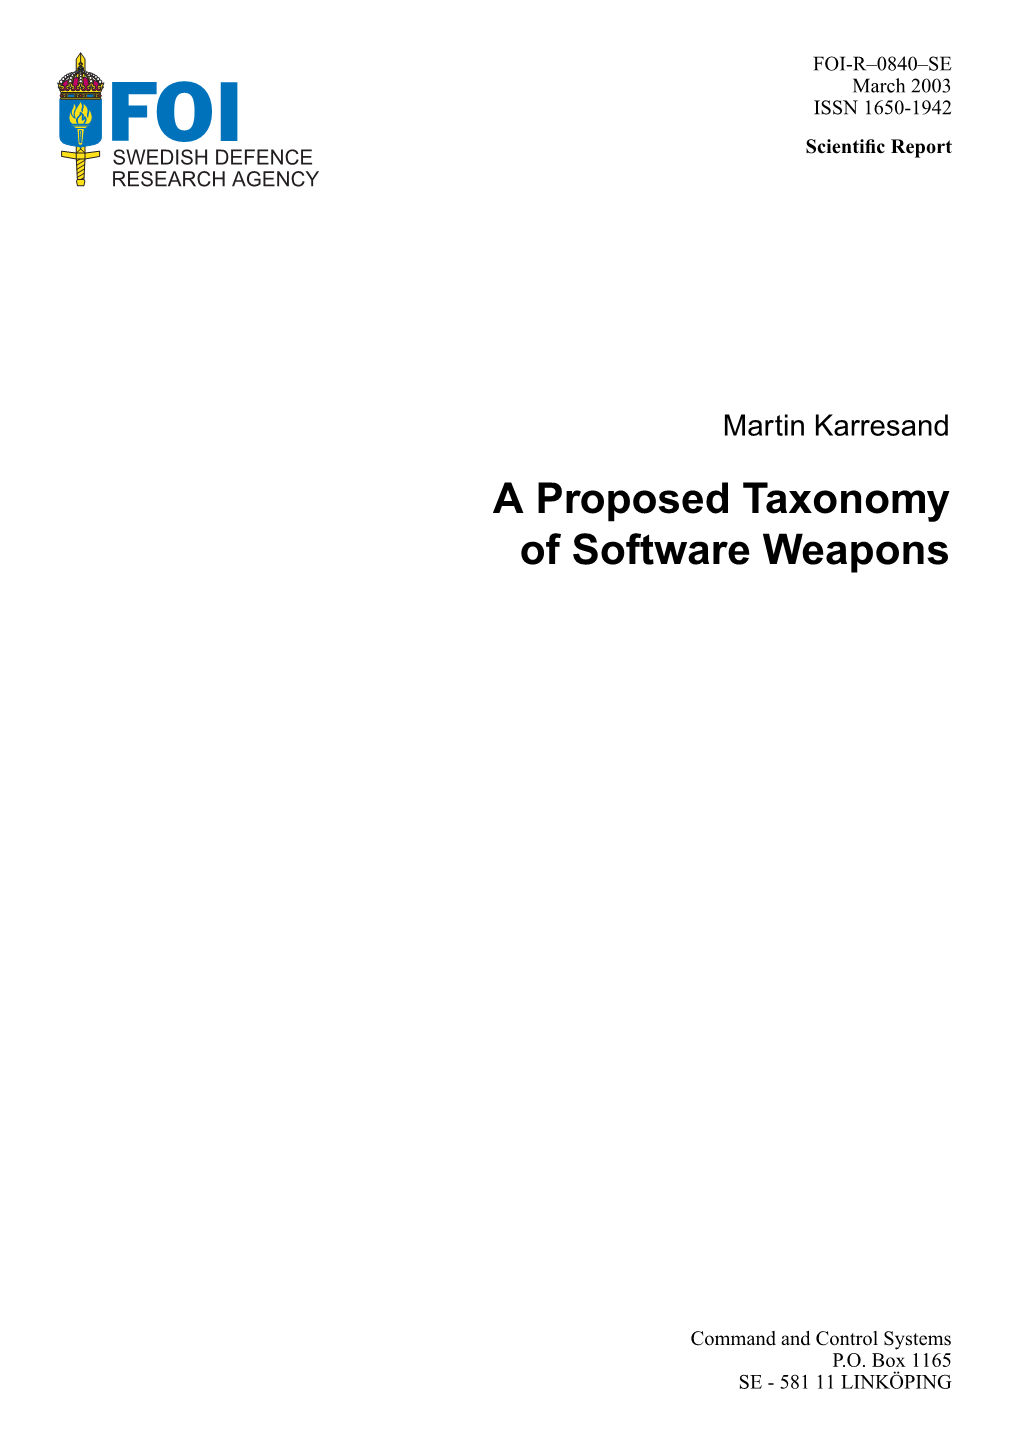 A Proposed Taxonomy of Software Weapons